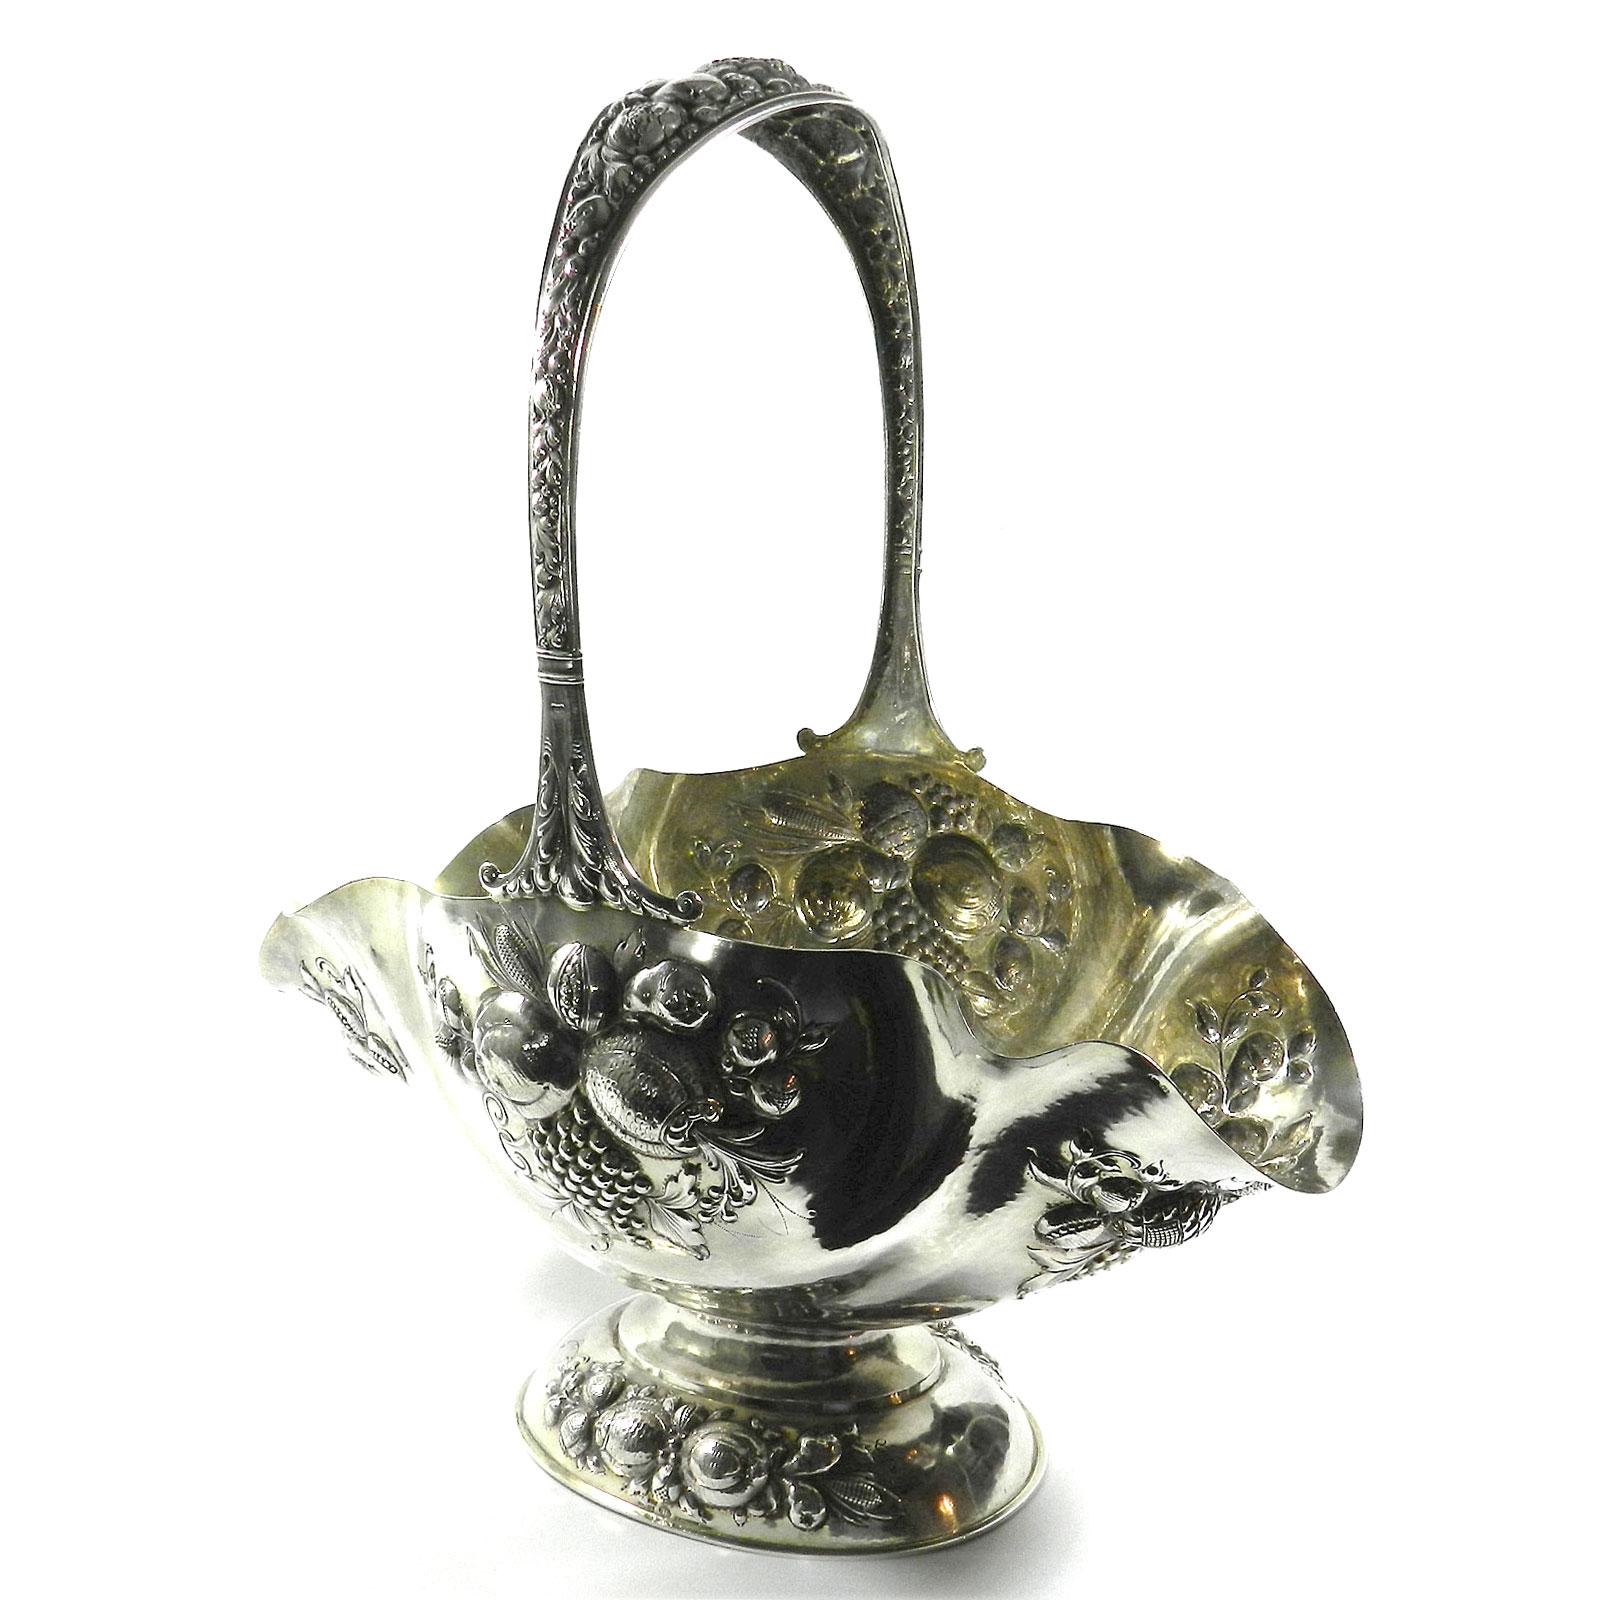 Antique German Silver Basket Centerpiece Carl Weishaupt Munich circa 1900

Magnificent handle basket on a constricted foot,  the oval body all over richly decorated with chased fruit design. Overlapping, appropriately decorated handle. Gilded